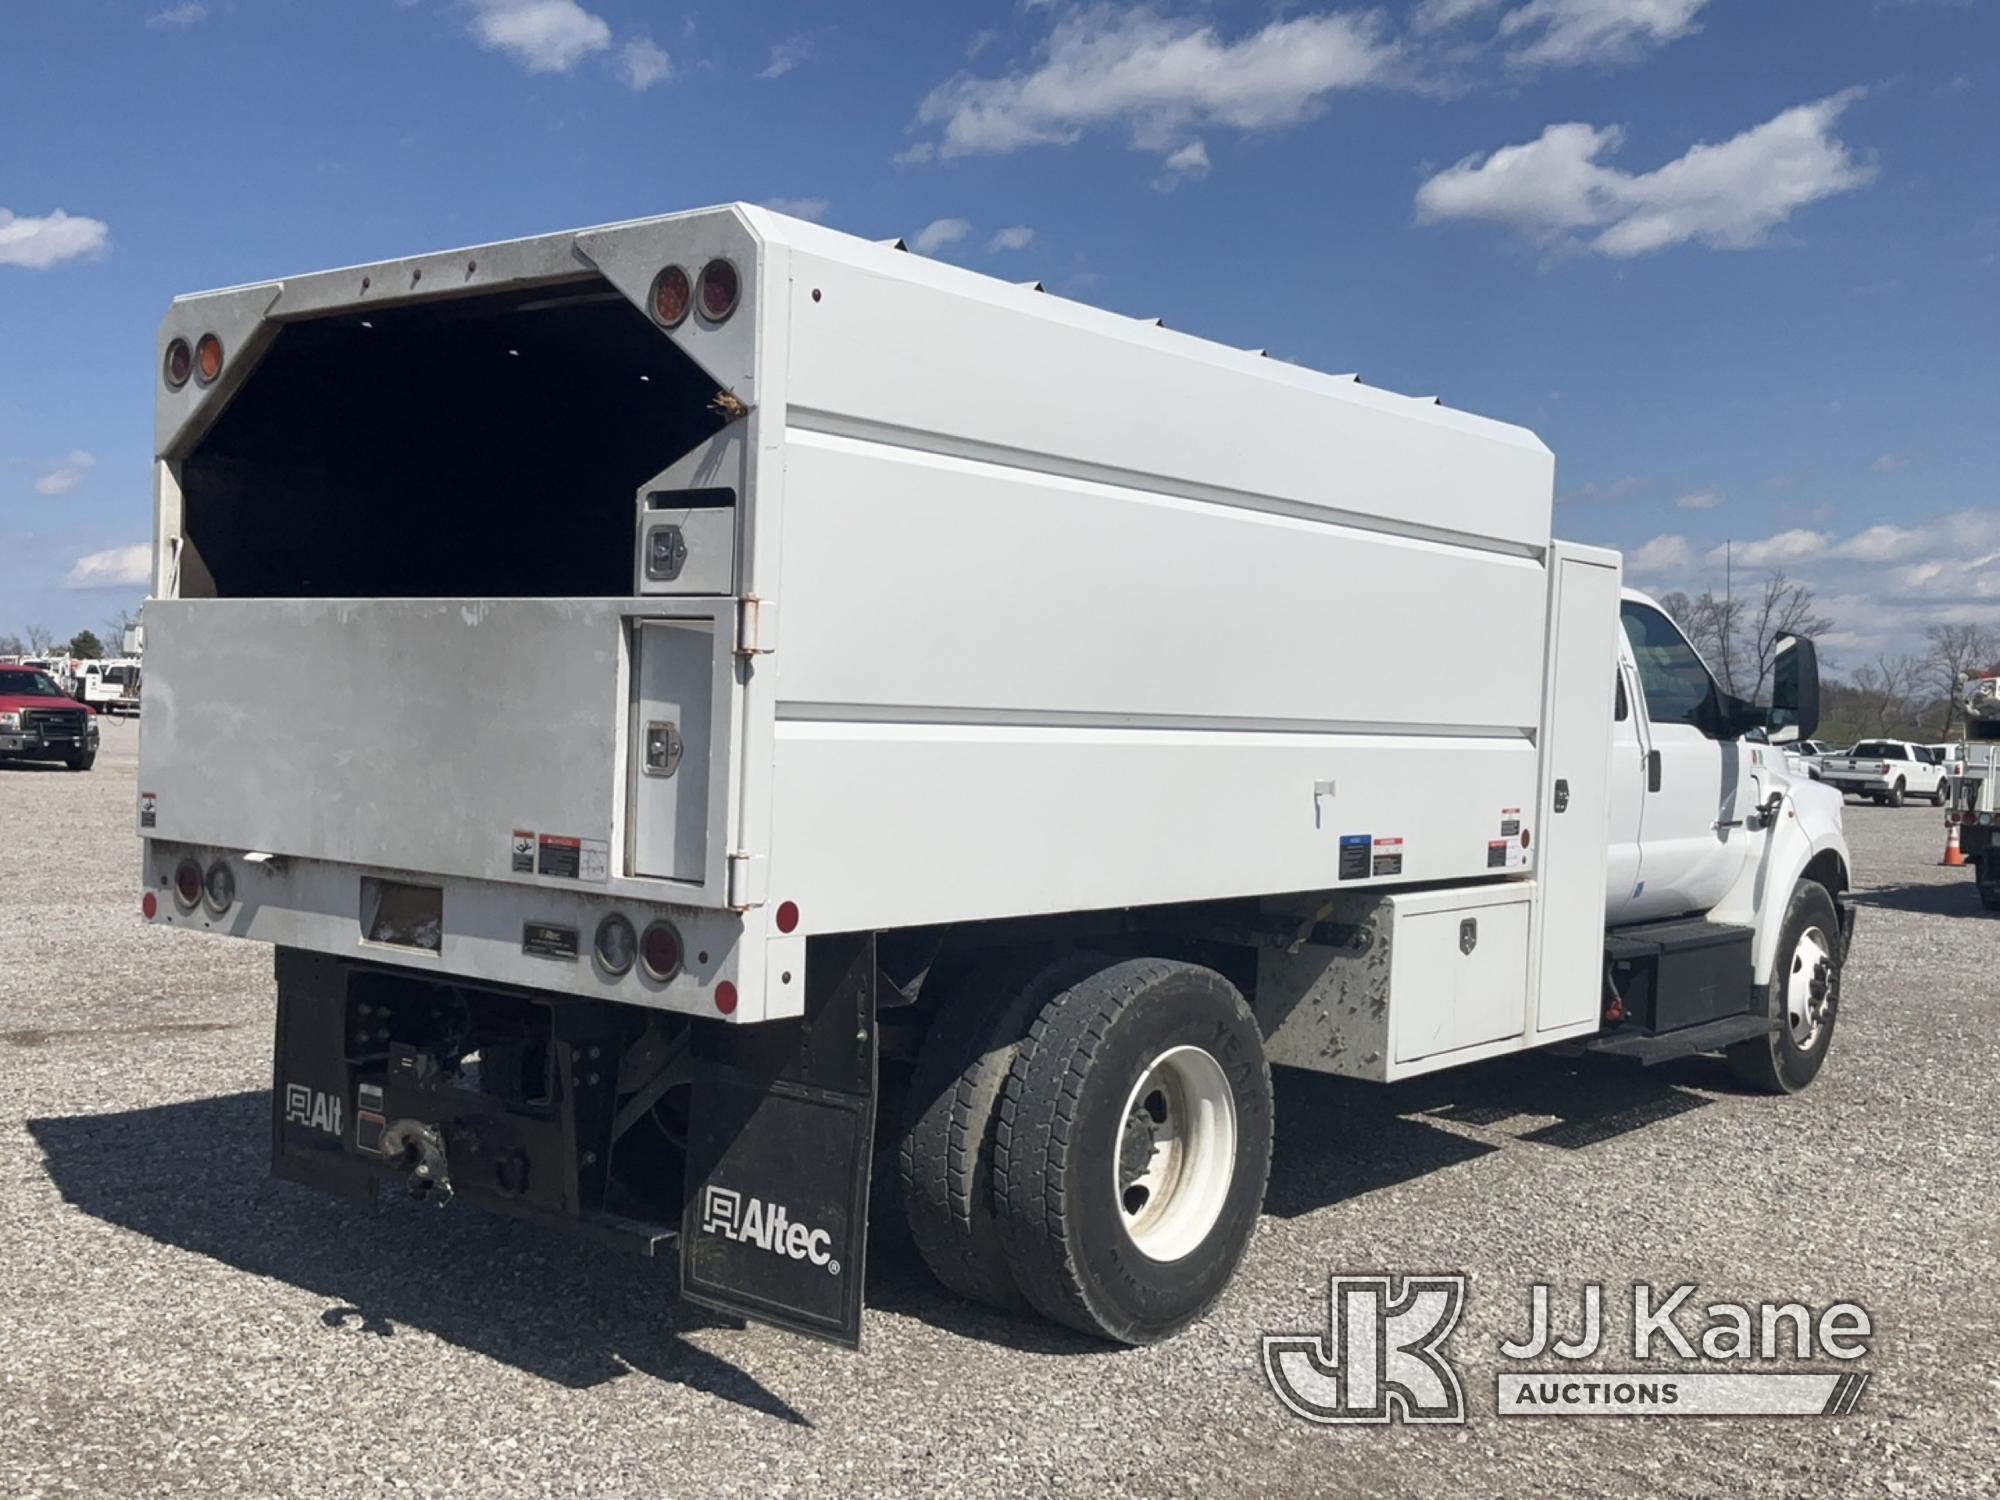 (Verona, KY) 2021 Ford F750 Extended-Cab Chipper Dump Truck Runs, Moves & Operates